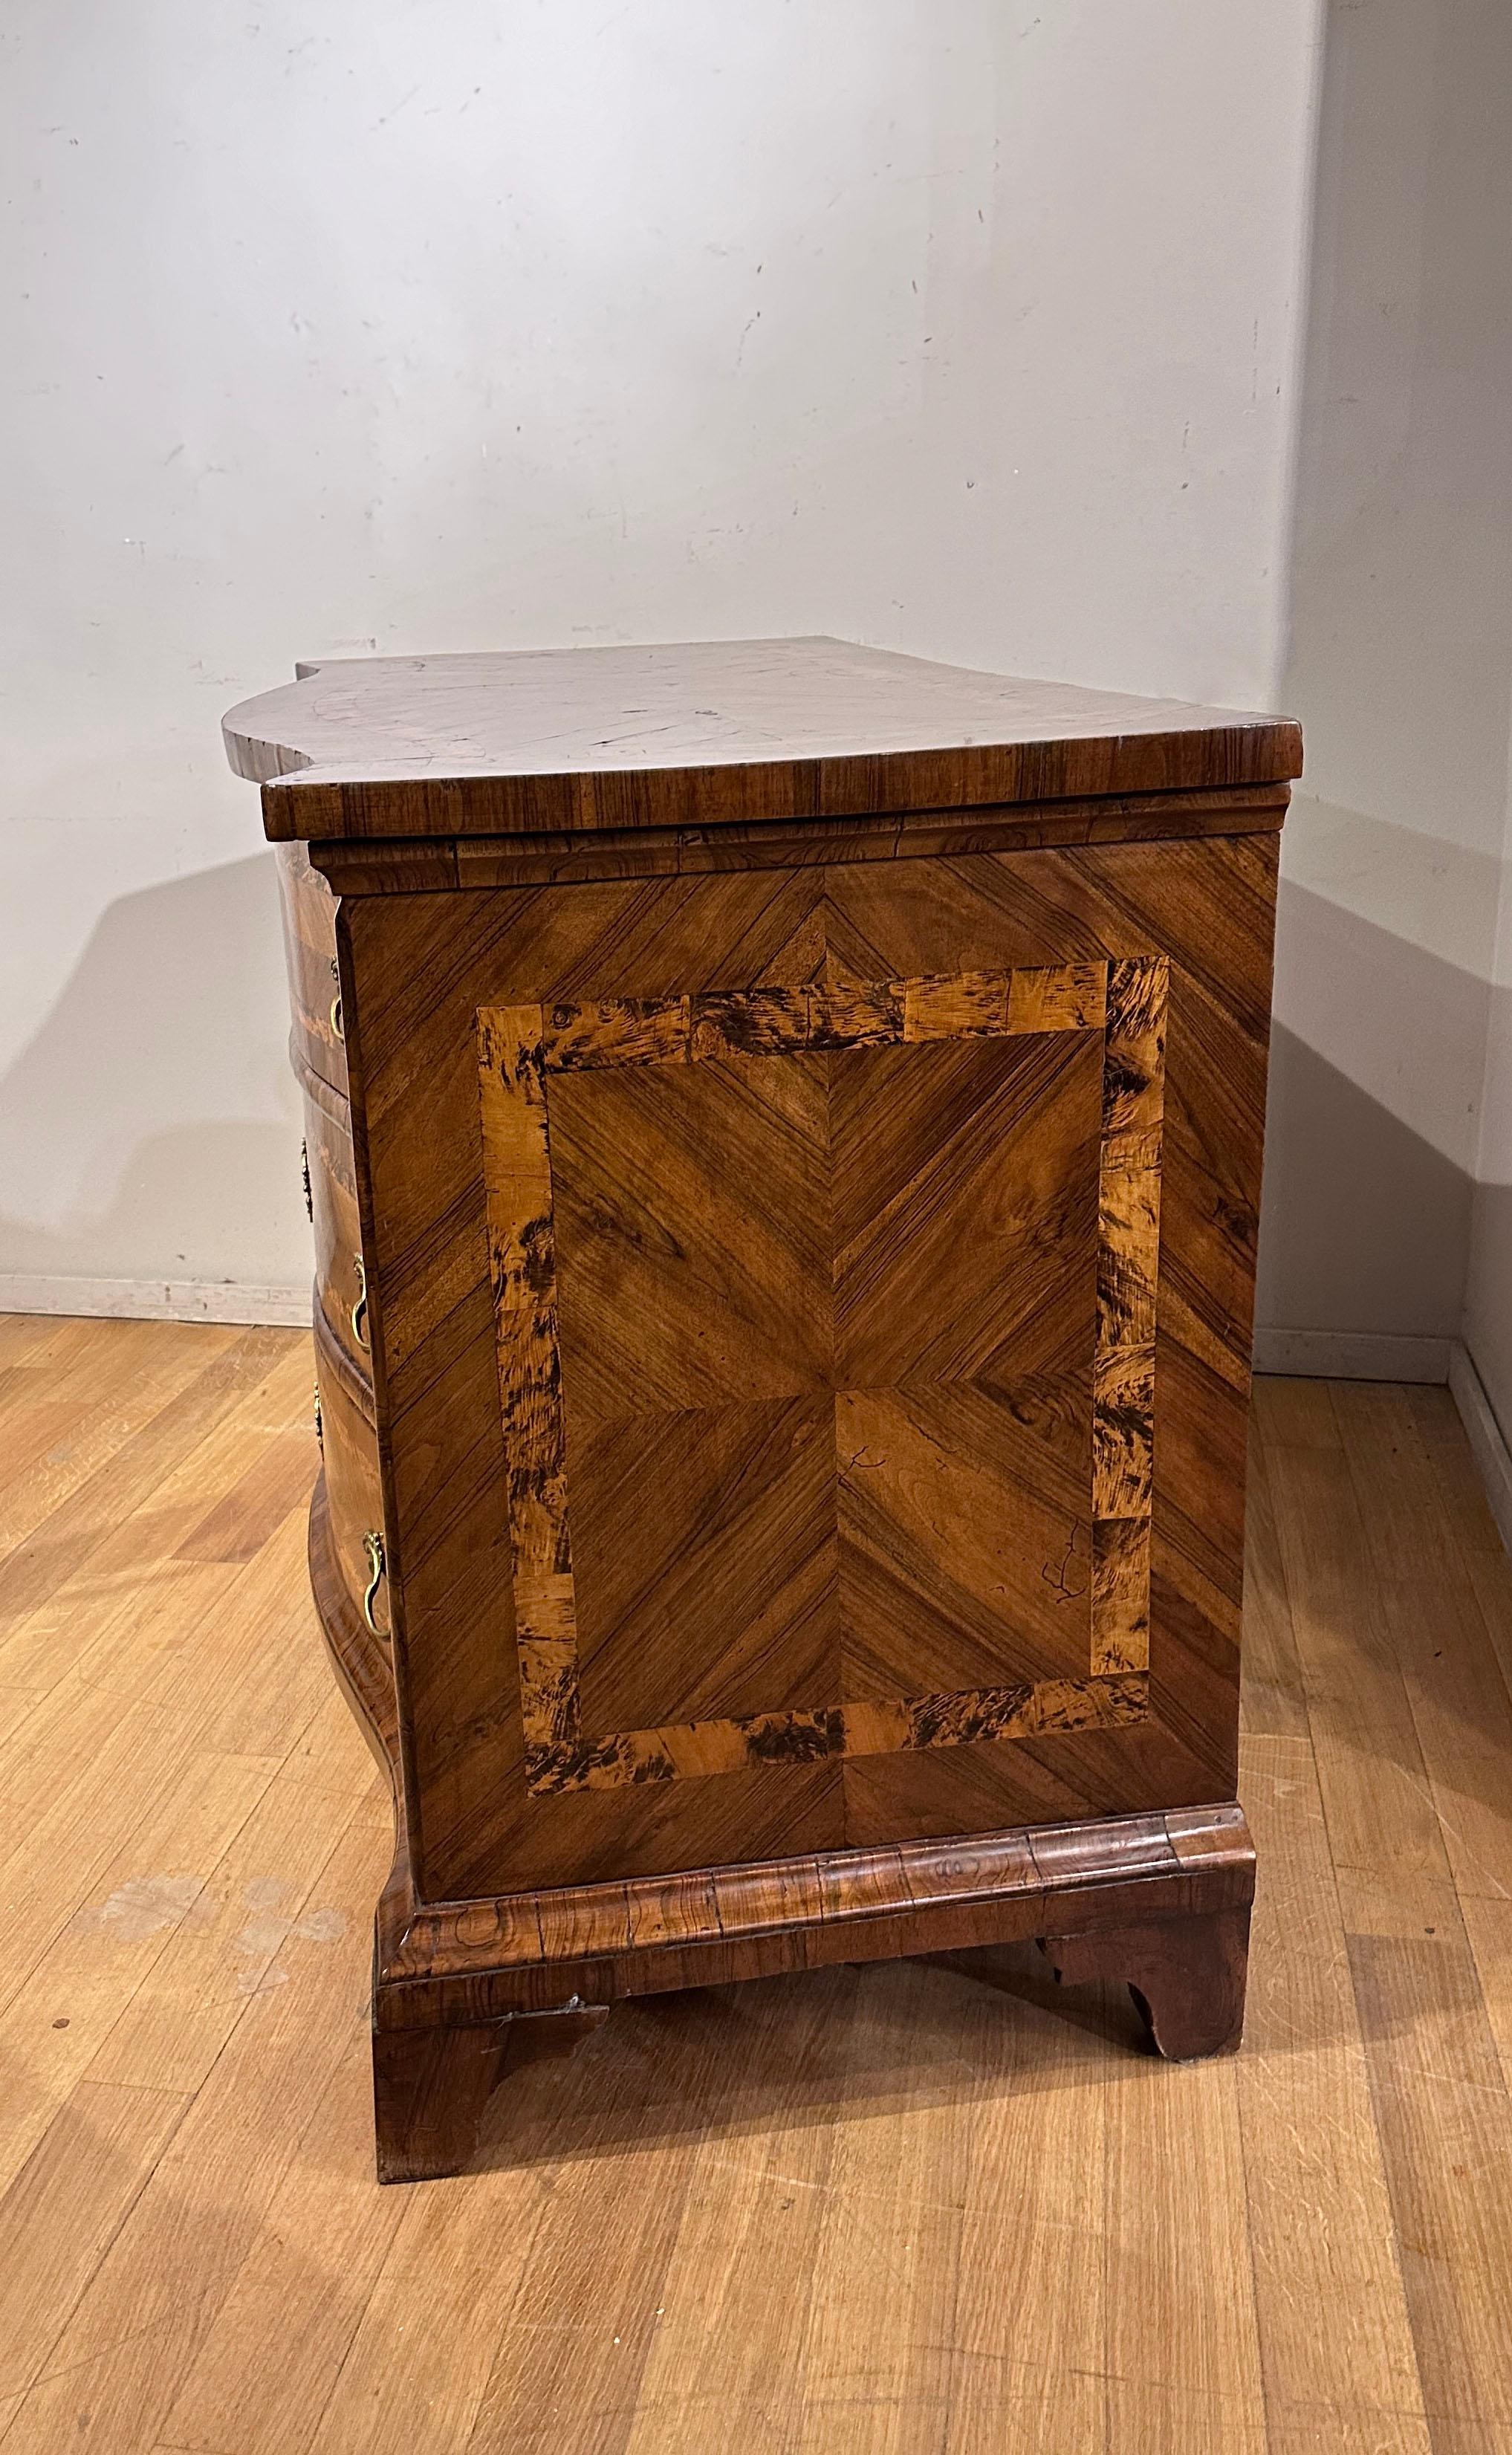 Hand-Carved 18th CENTURY VENETIAN CHEST For Sale